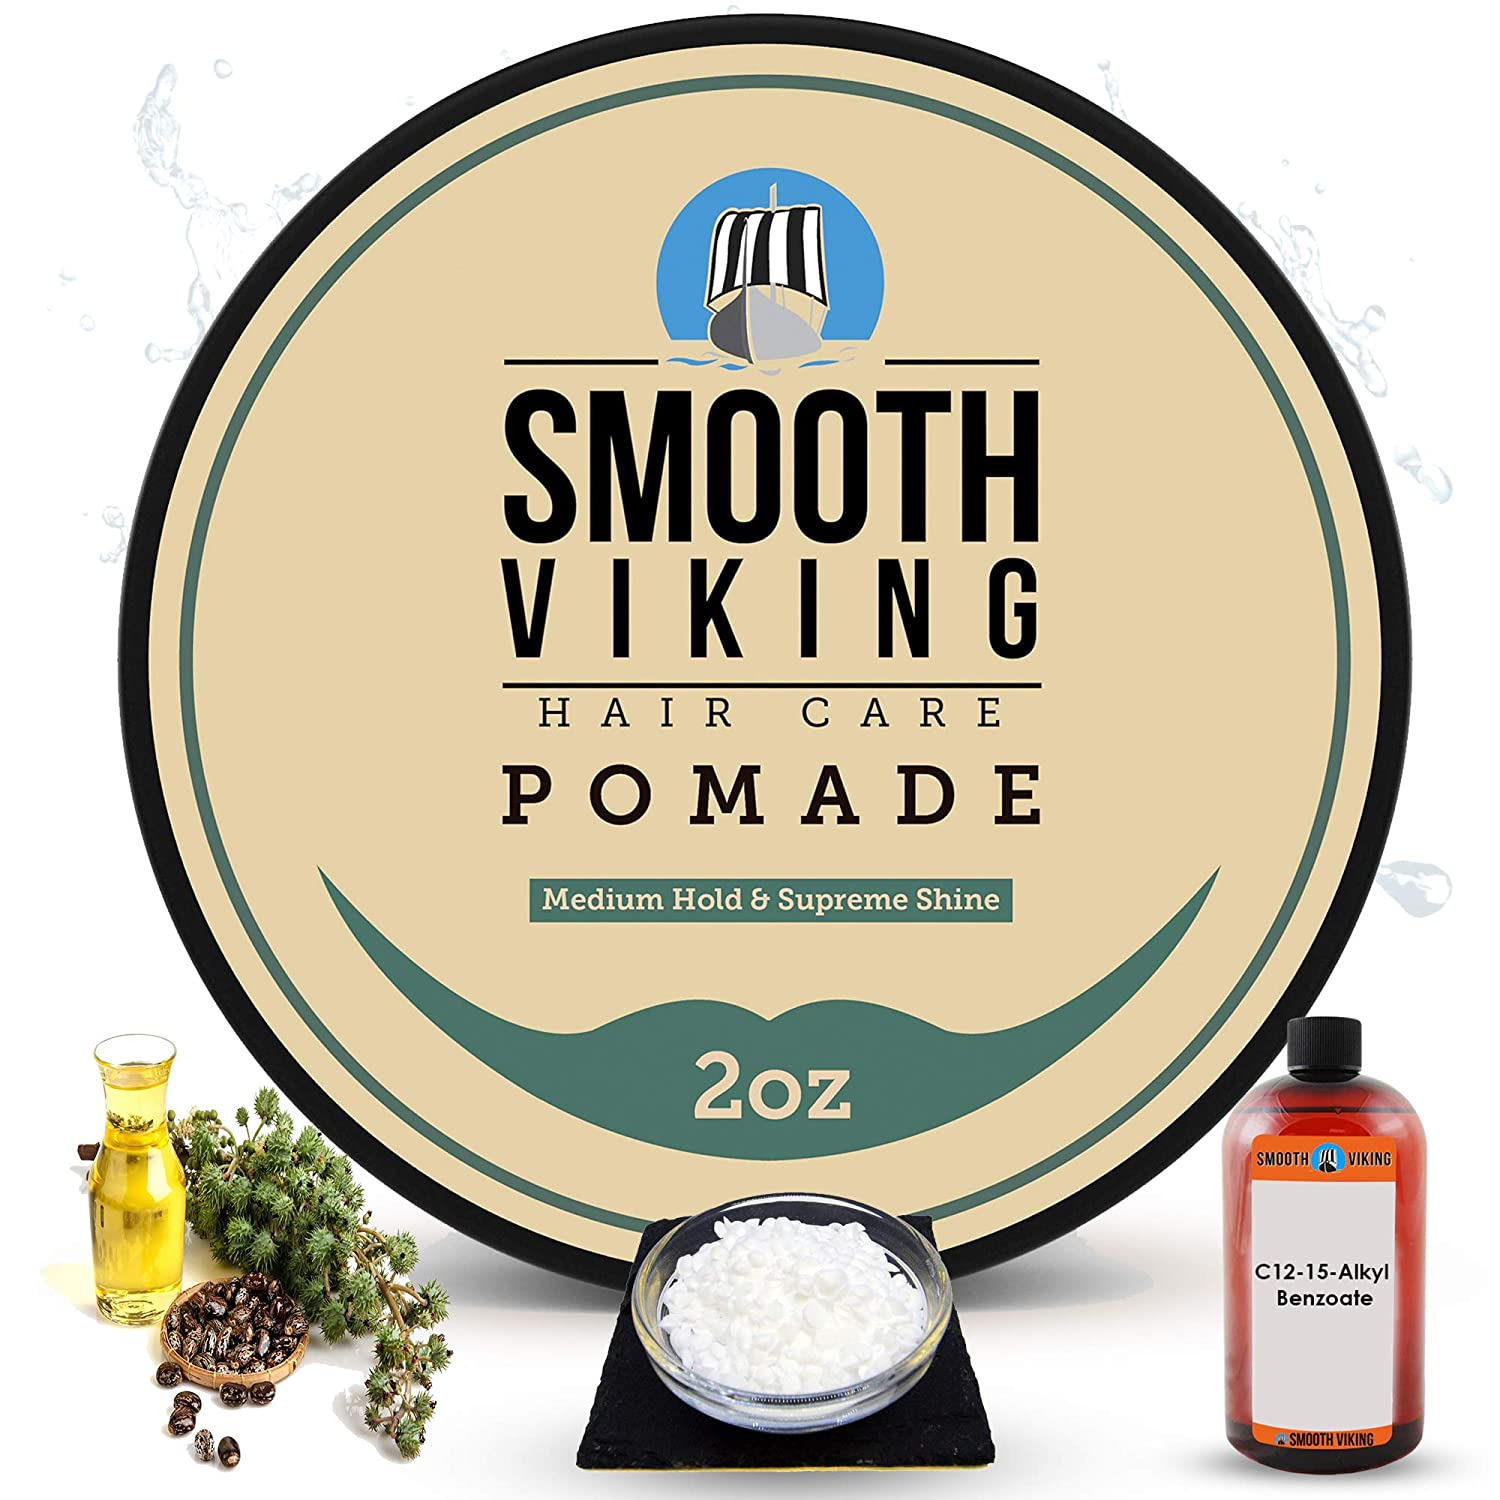 smooth viking pomade review